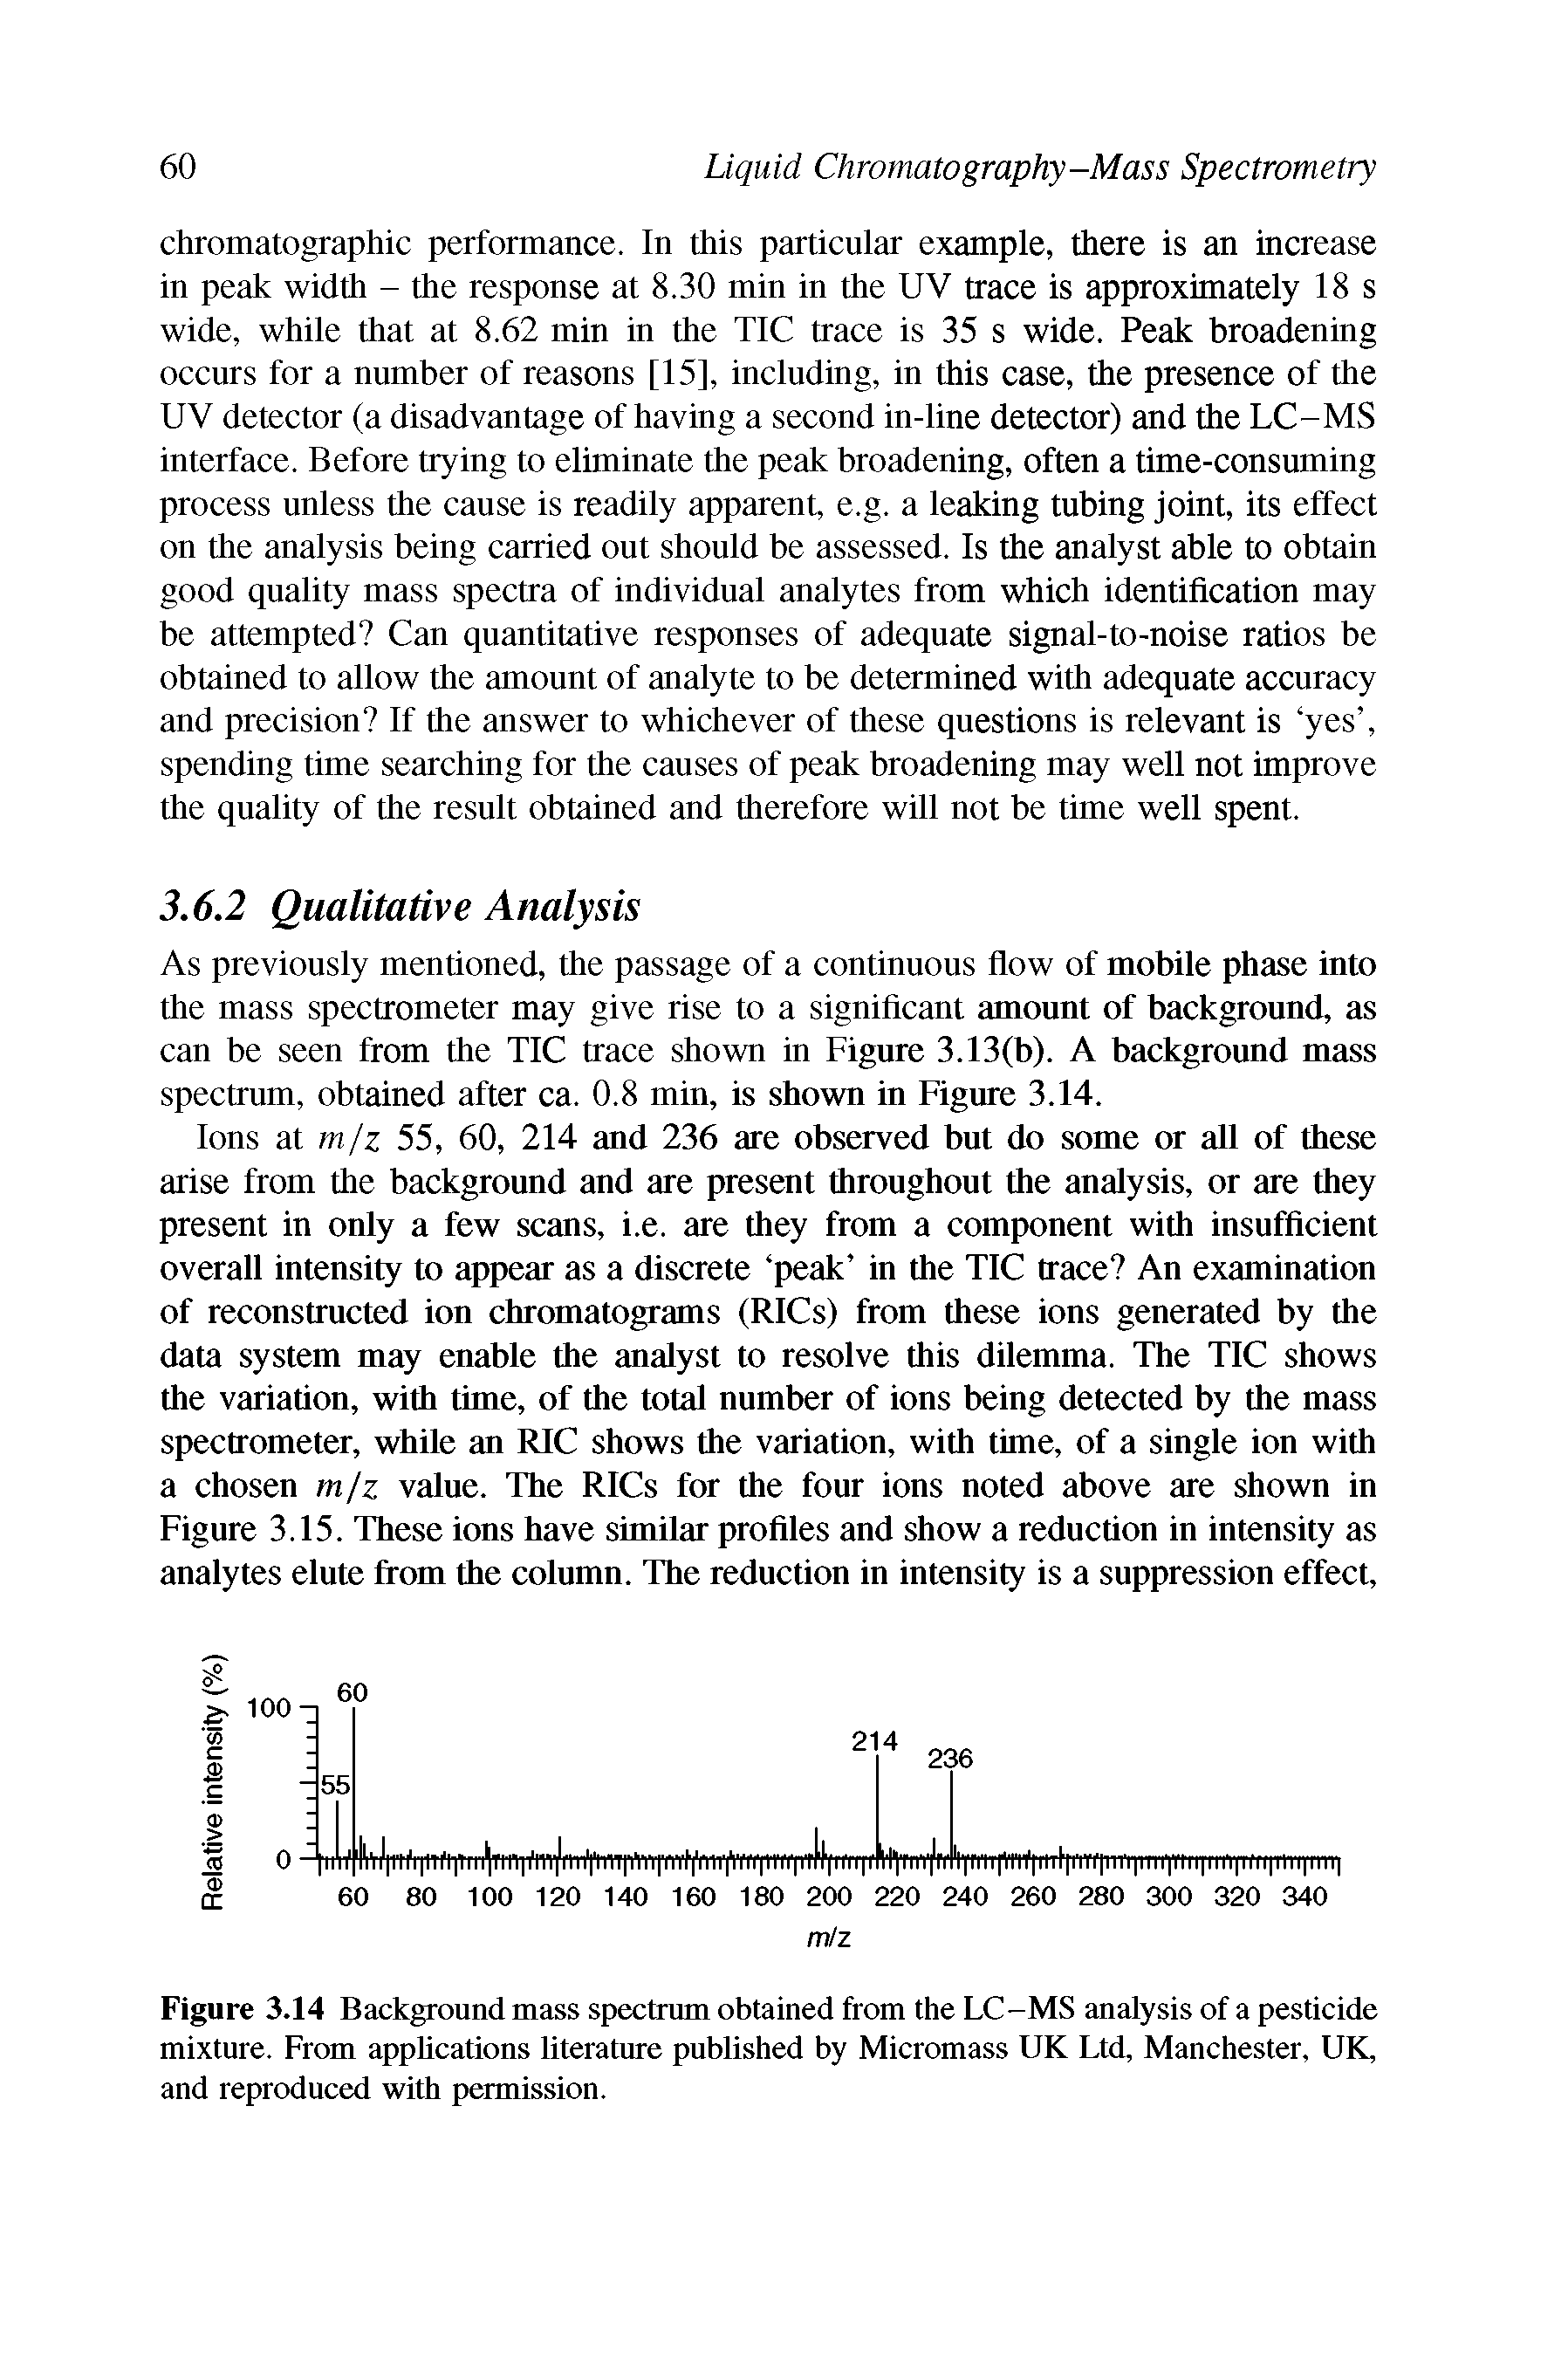 Figure 3.14 Background mass spectrum obtained from the LC-MS analysis of a pesticide mixture. From applications literature published by Micromass UK Ltd, Manchester, UK, and reproduced with permission.